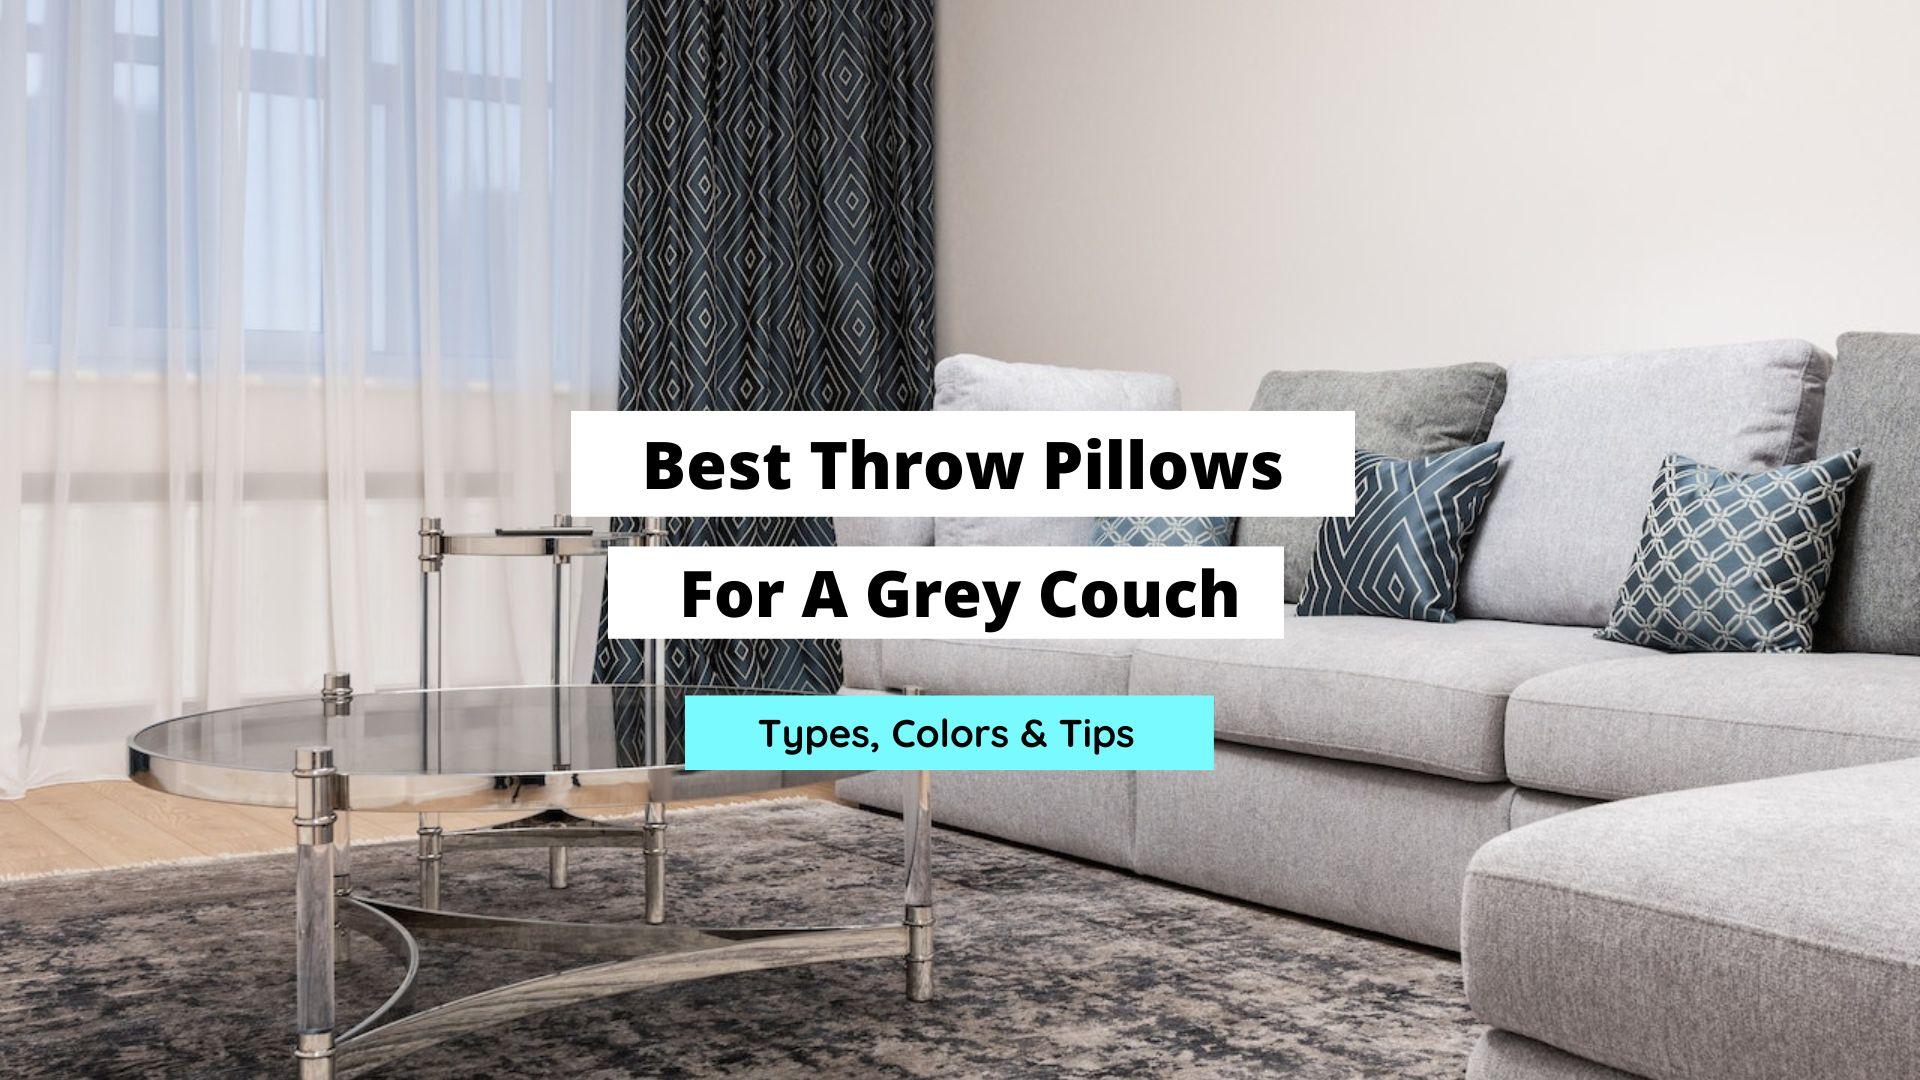 Best Throw Pillows For A Grey Couch